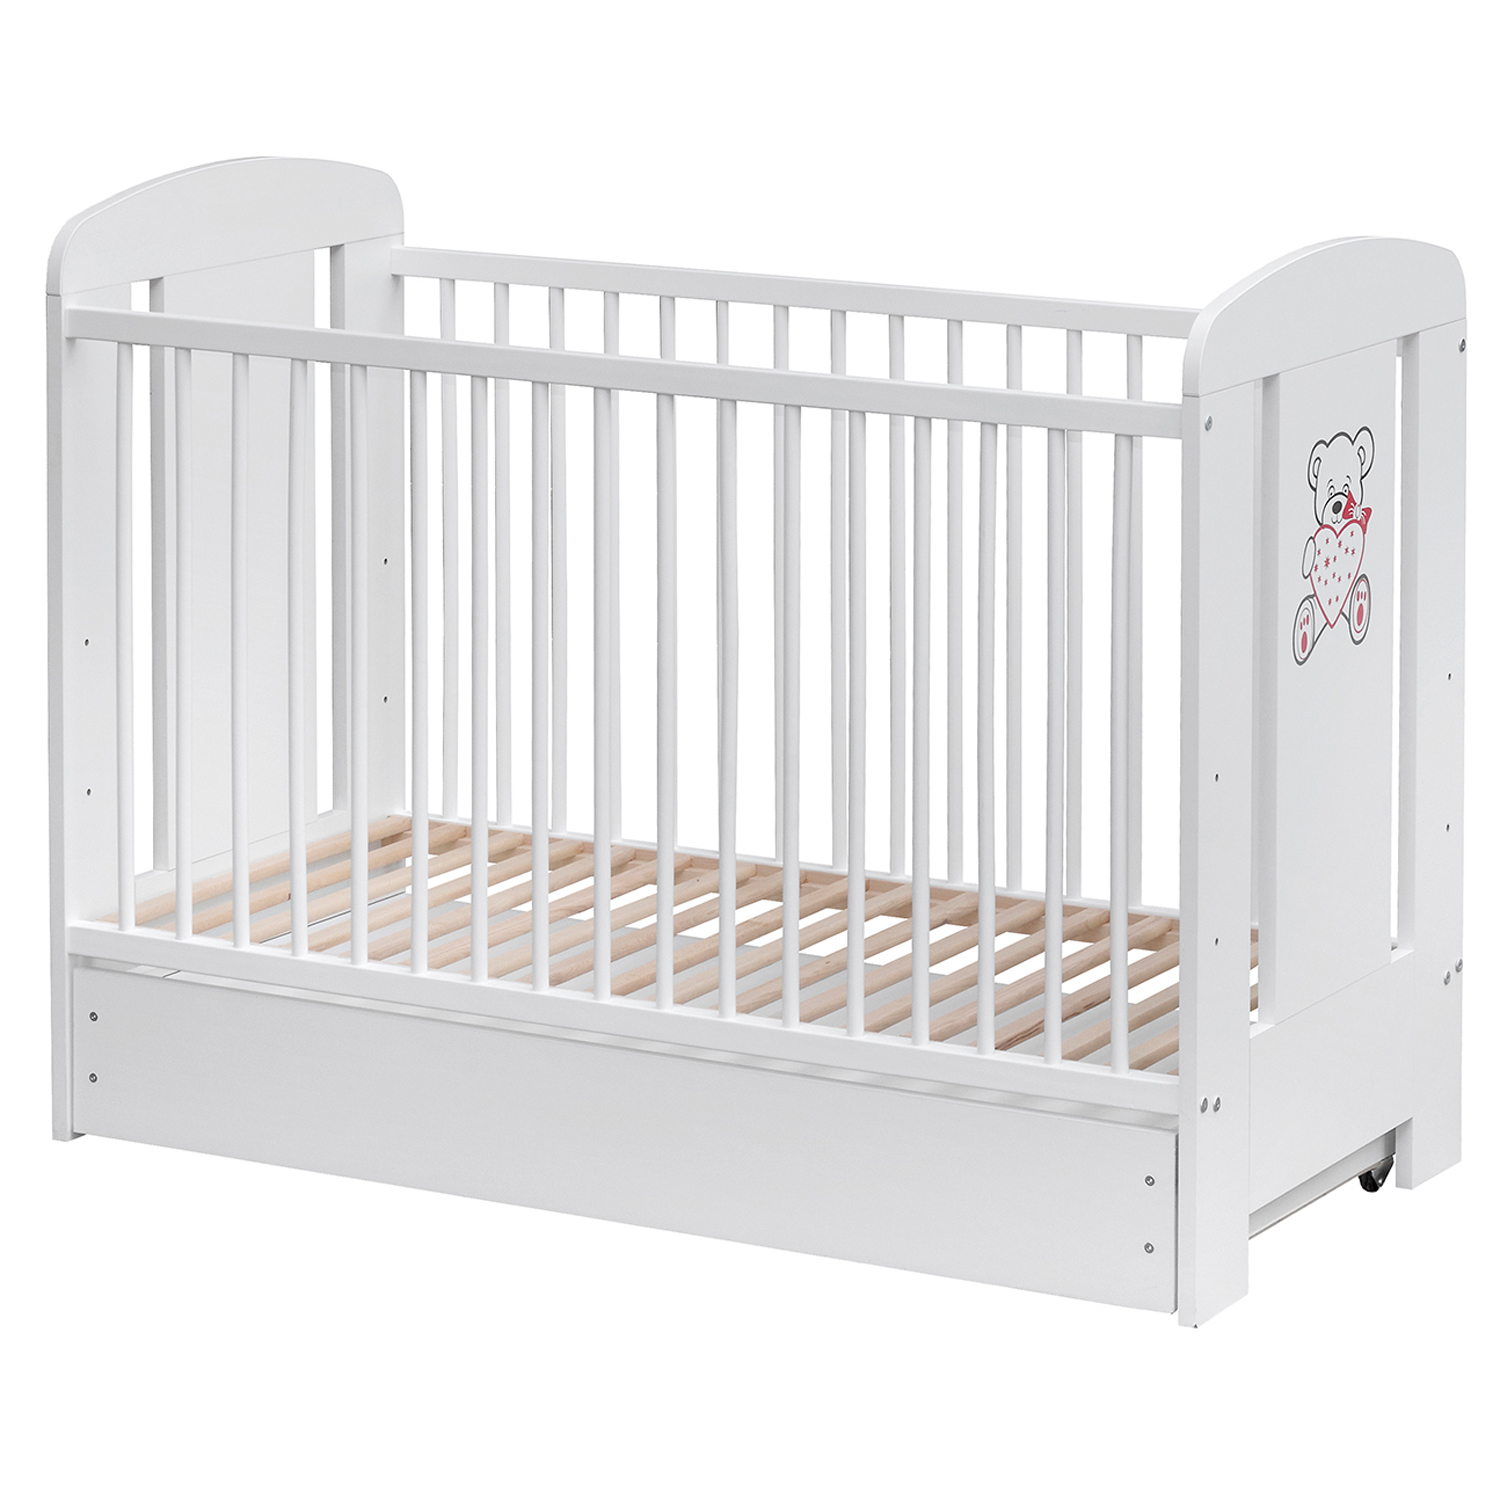 Wooden baby bed Kamil white 120x60